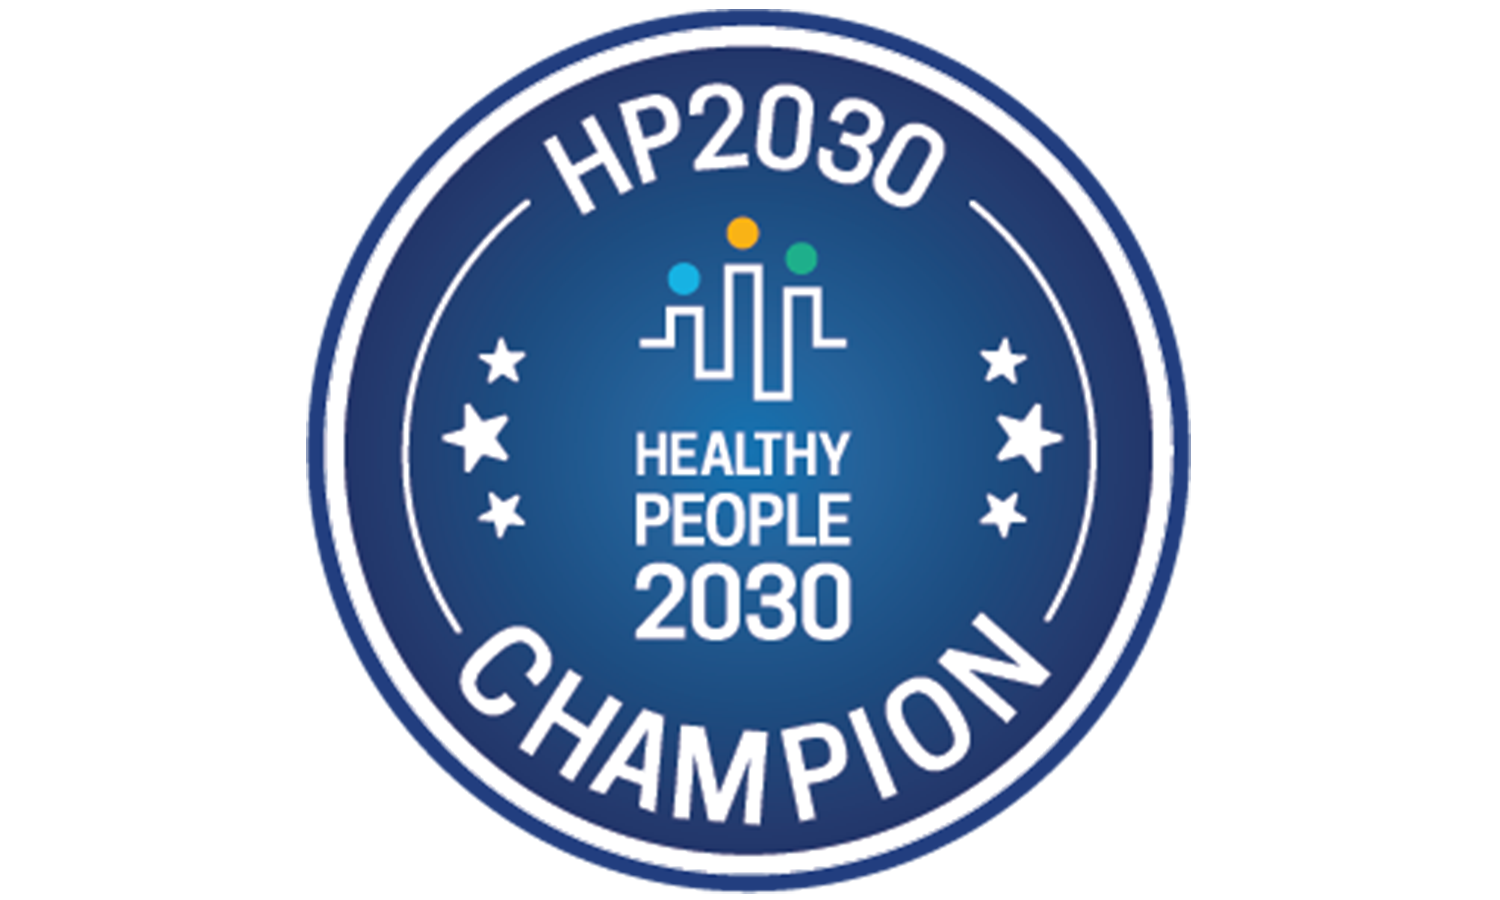 WIHA Recognized as a Healthy People 2030 Champion